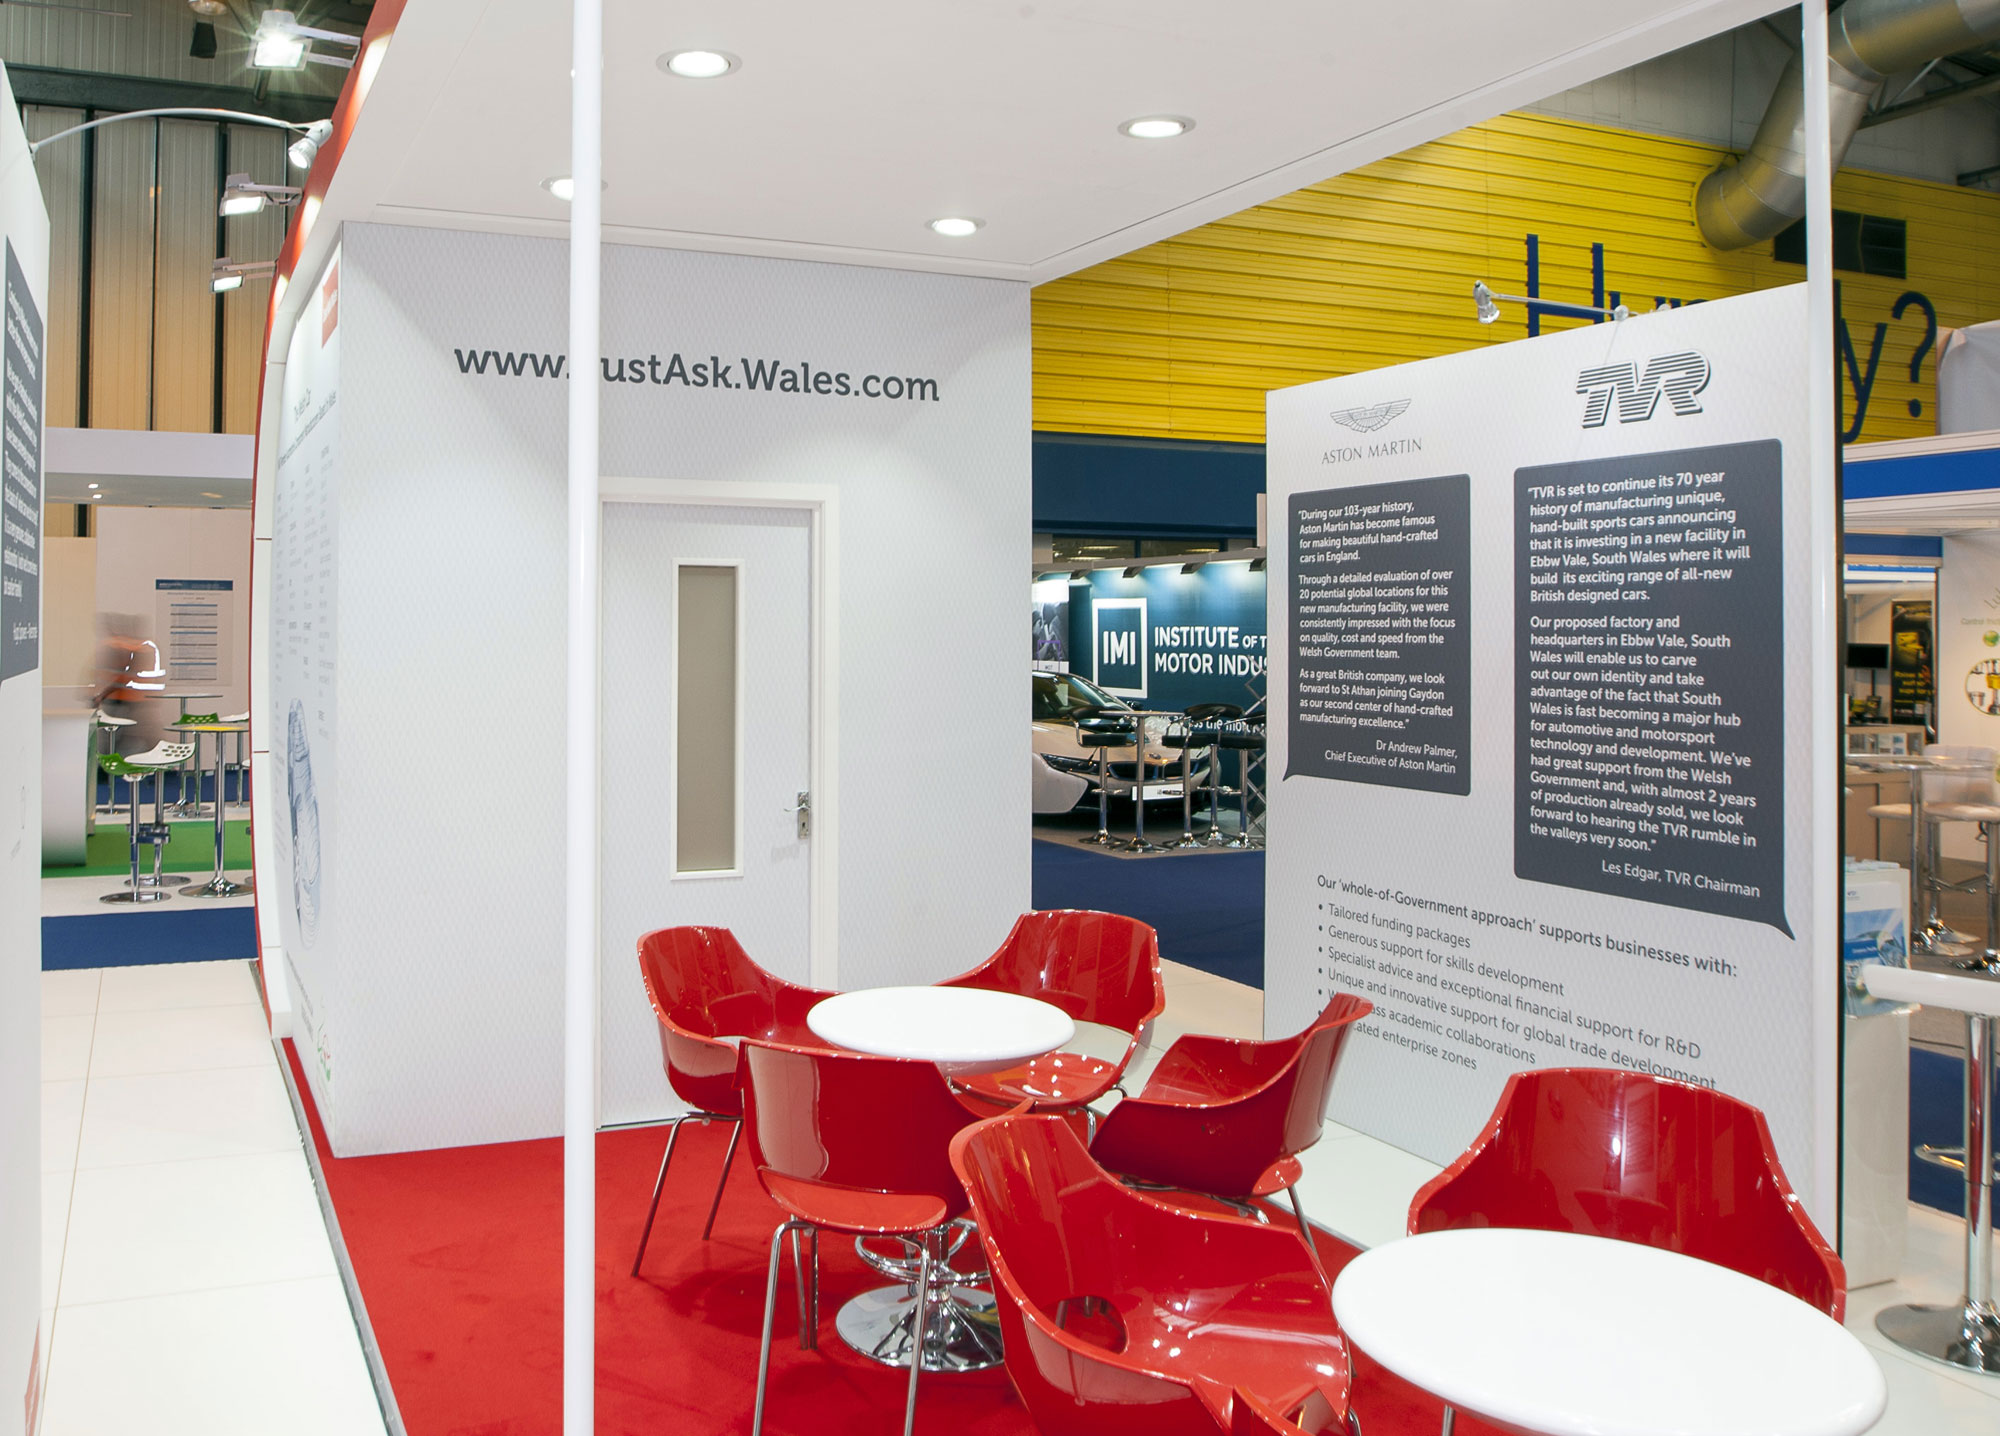 Exhibition stand design welsh government